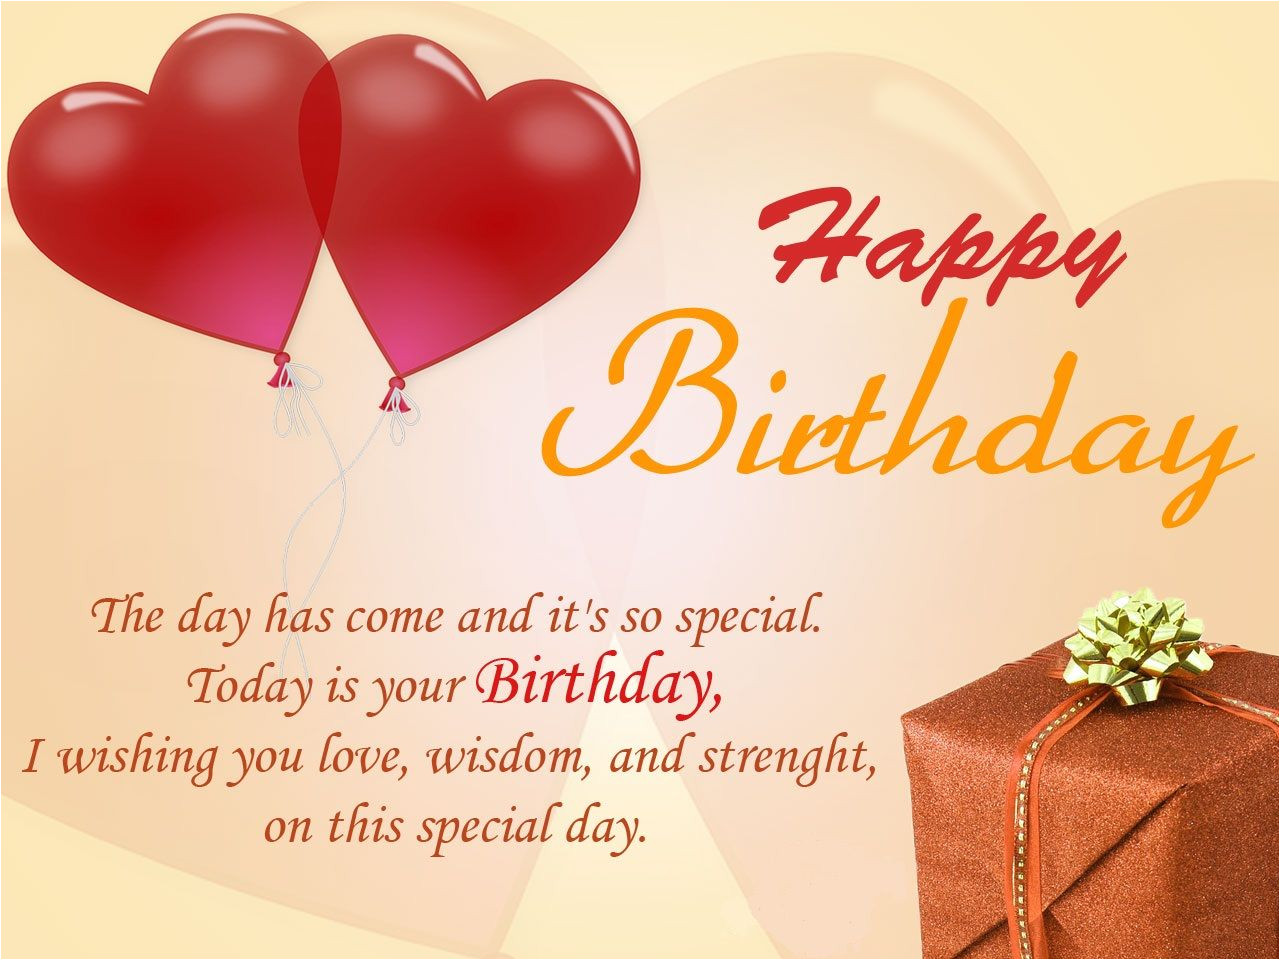 Greeting Card Quotes for Birthday 27 Images Happy Birthday Wishes Quotes for Husband and Best